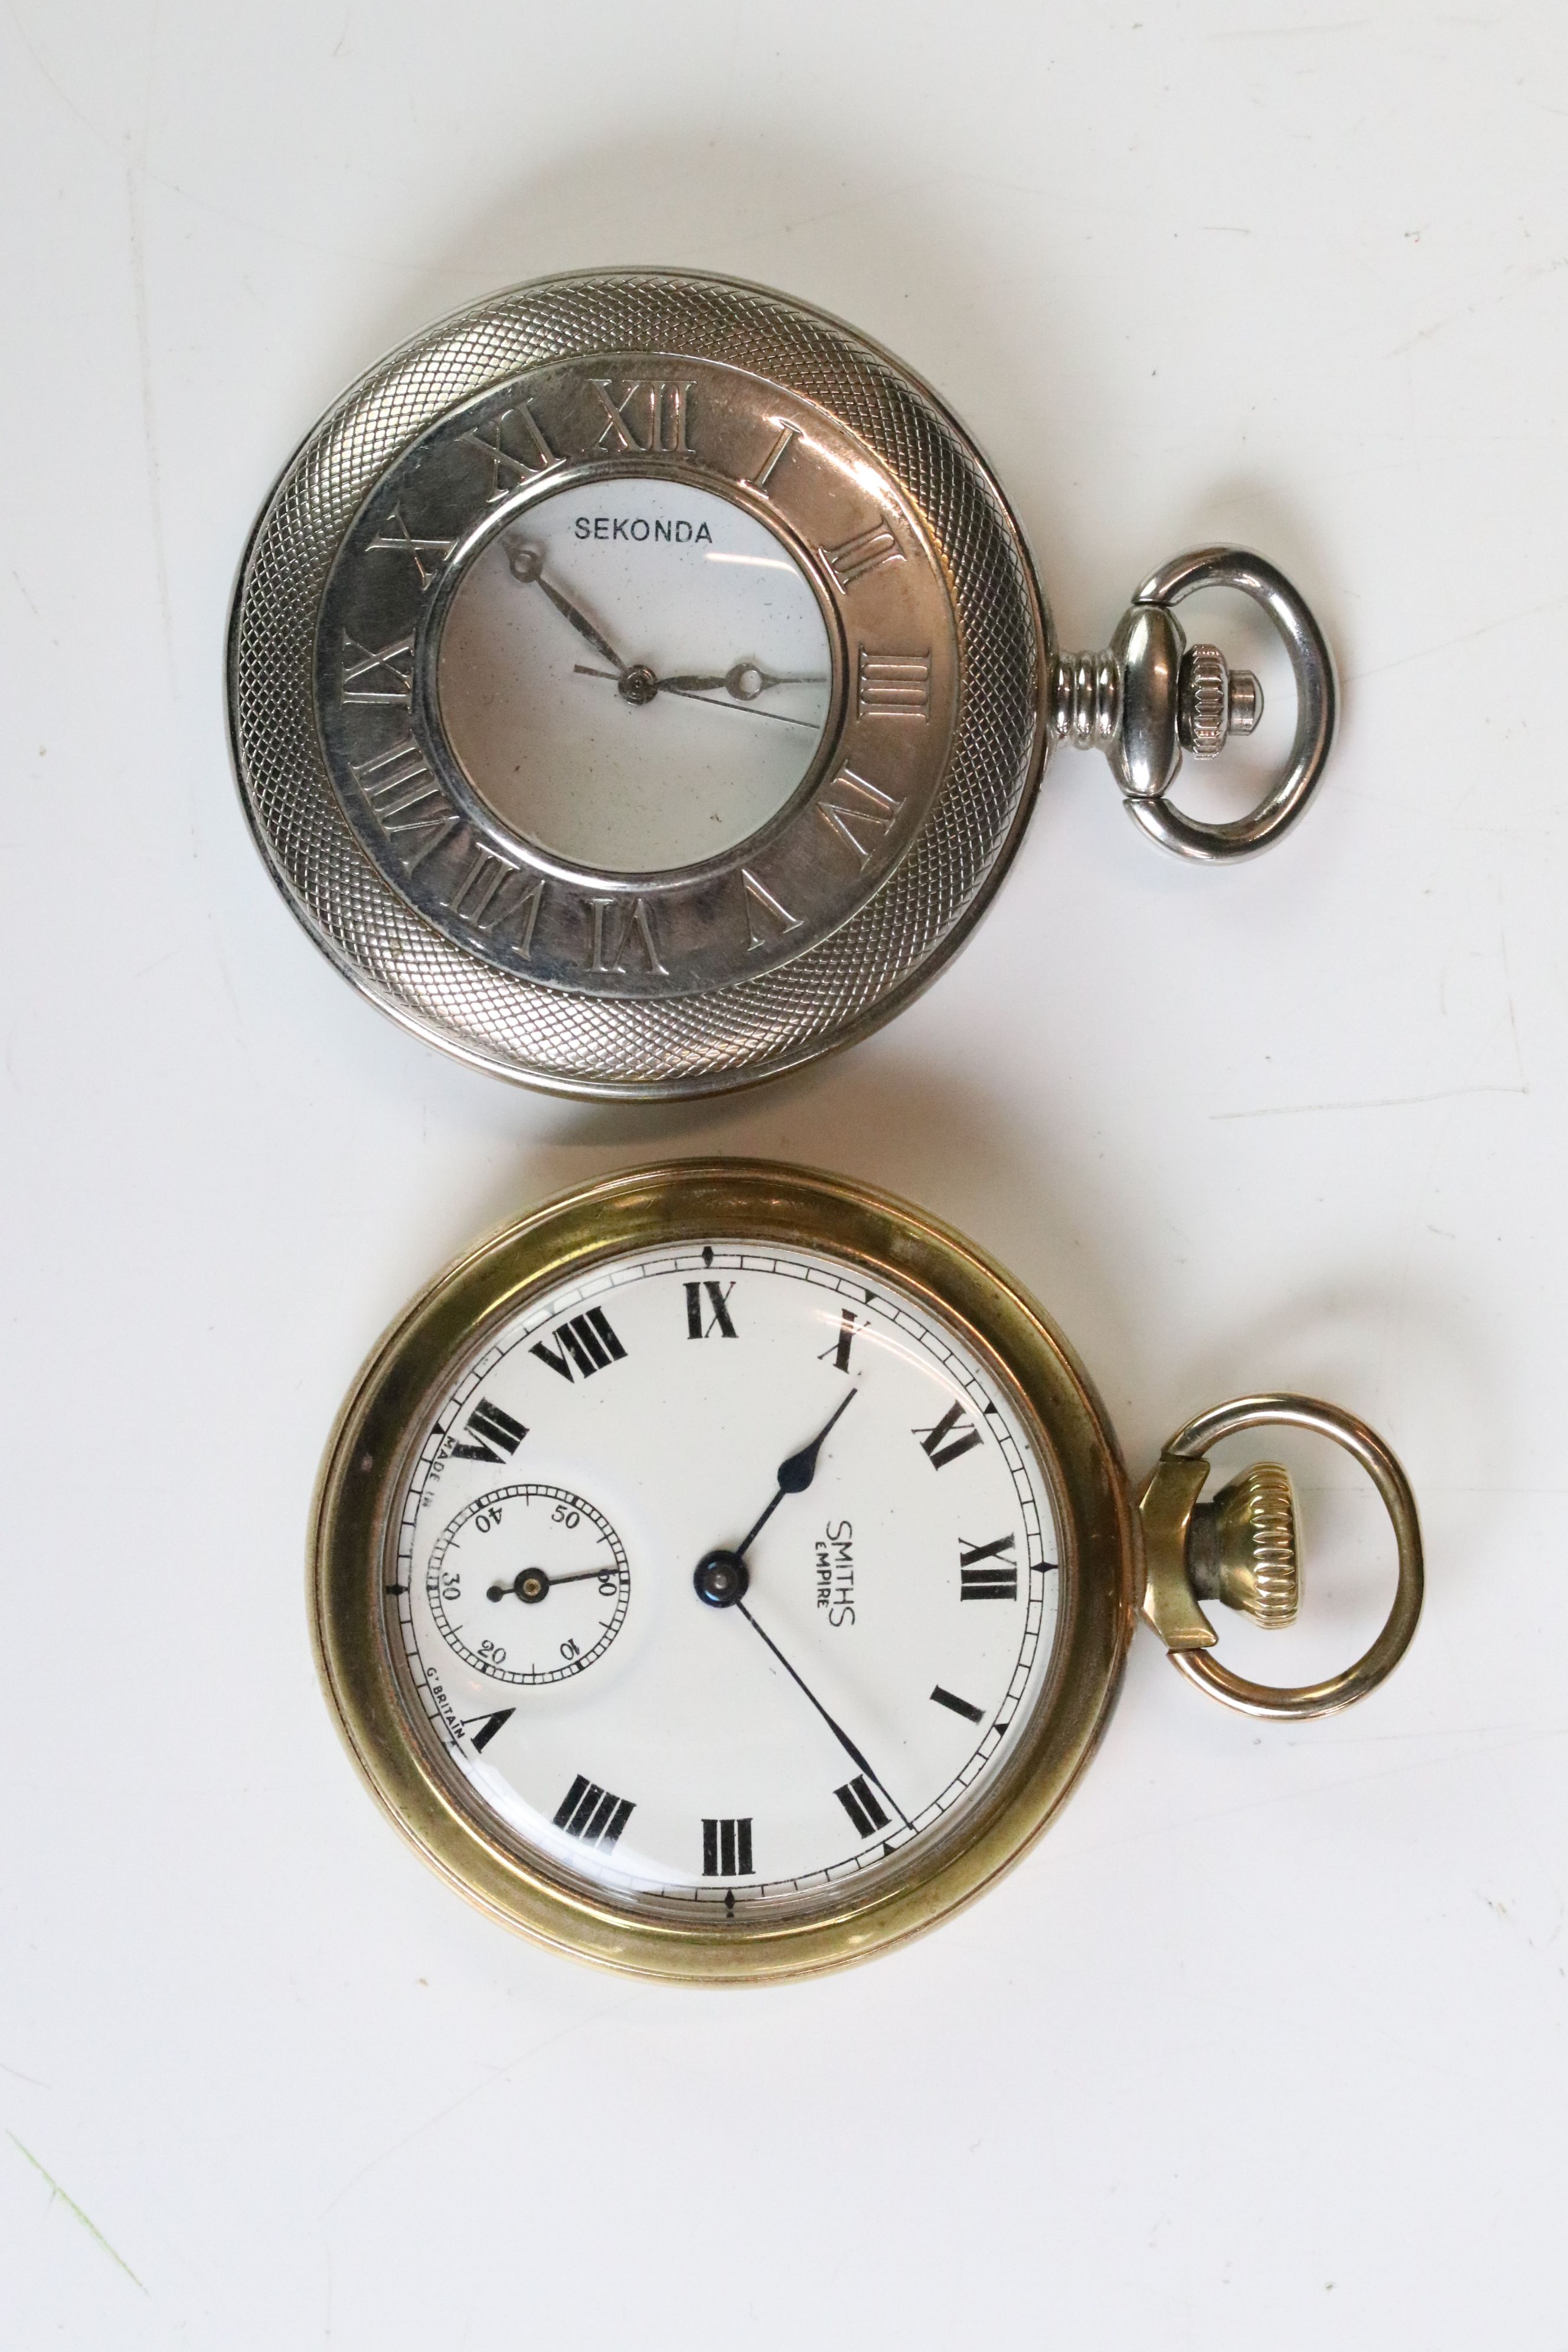 Two top winding pocket watches to include a Sekonda and a Smiths example.